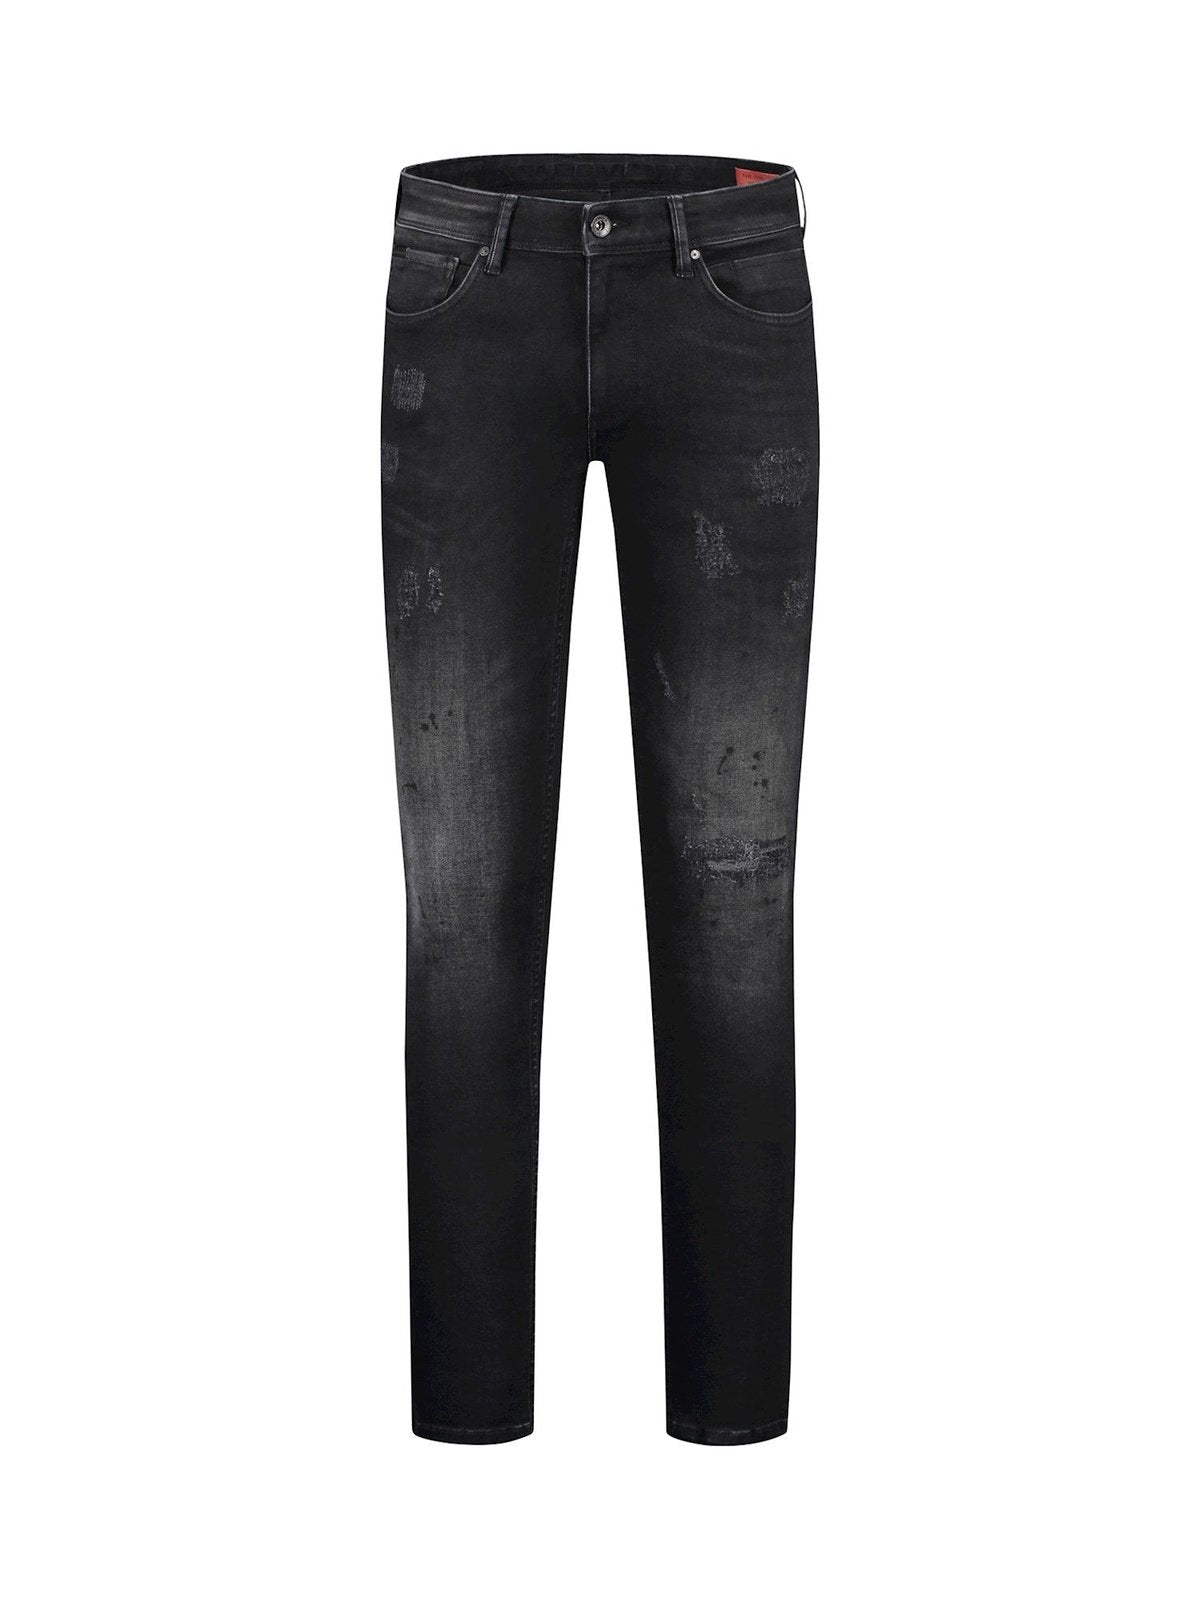 Skinny jeans with subtle damaging spots and black paint splashes